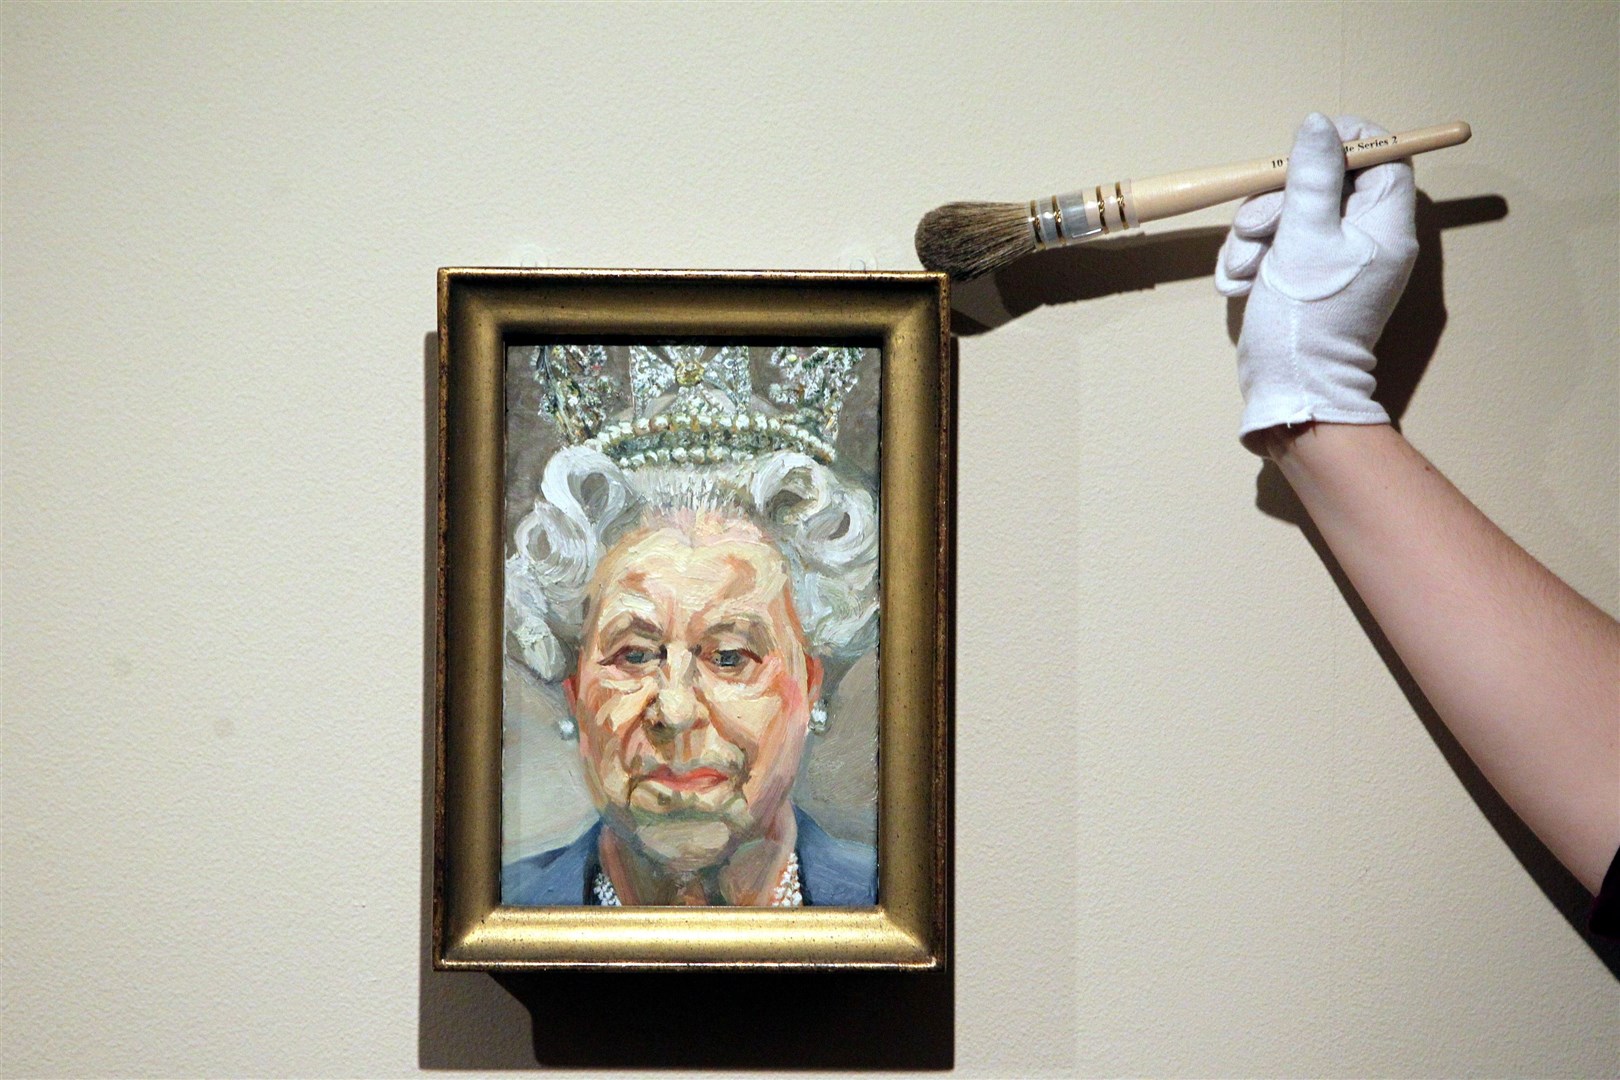 Curator Lauren Porter dusts a portrait of the Queen by Lucian Freud, who declined an award (Steve Parsons/PA)